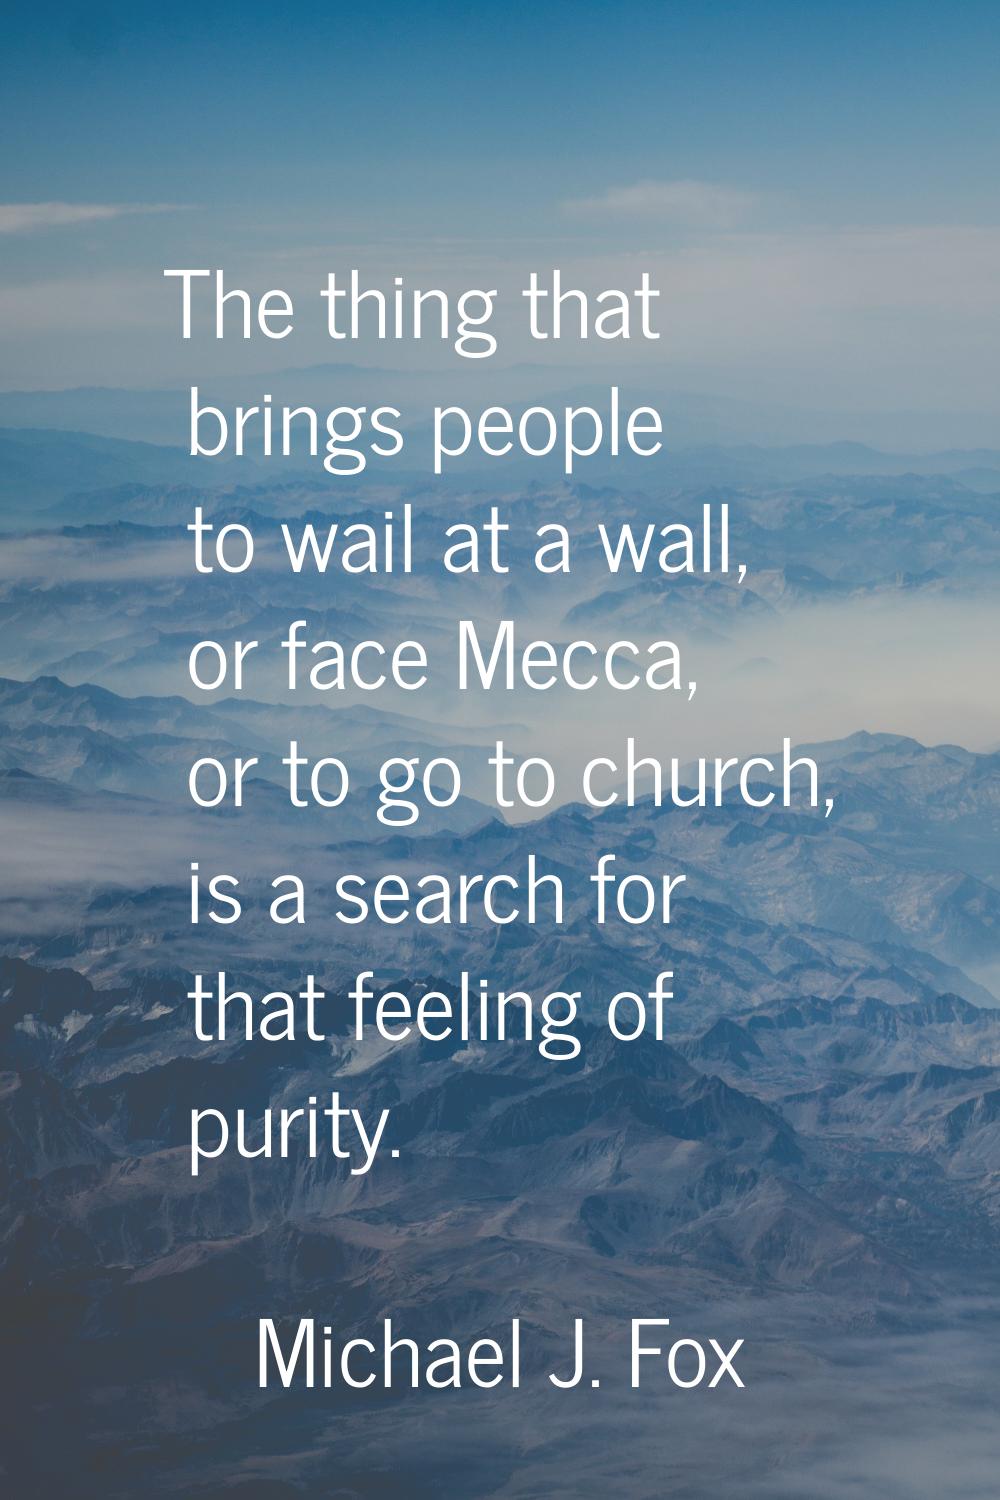 The thing that brings people to wail at a wall, or face Mecca, or to go to church, is a search for 